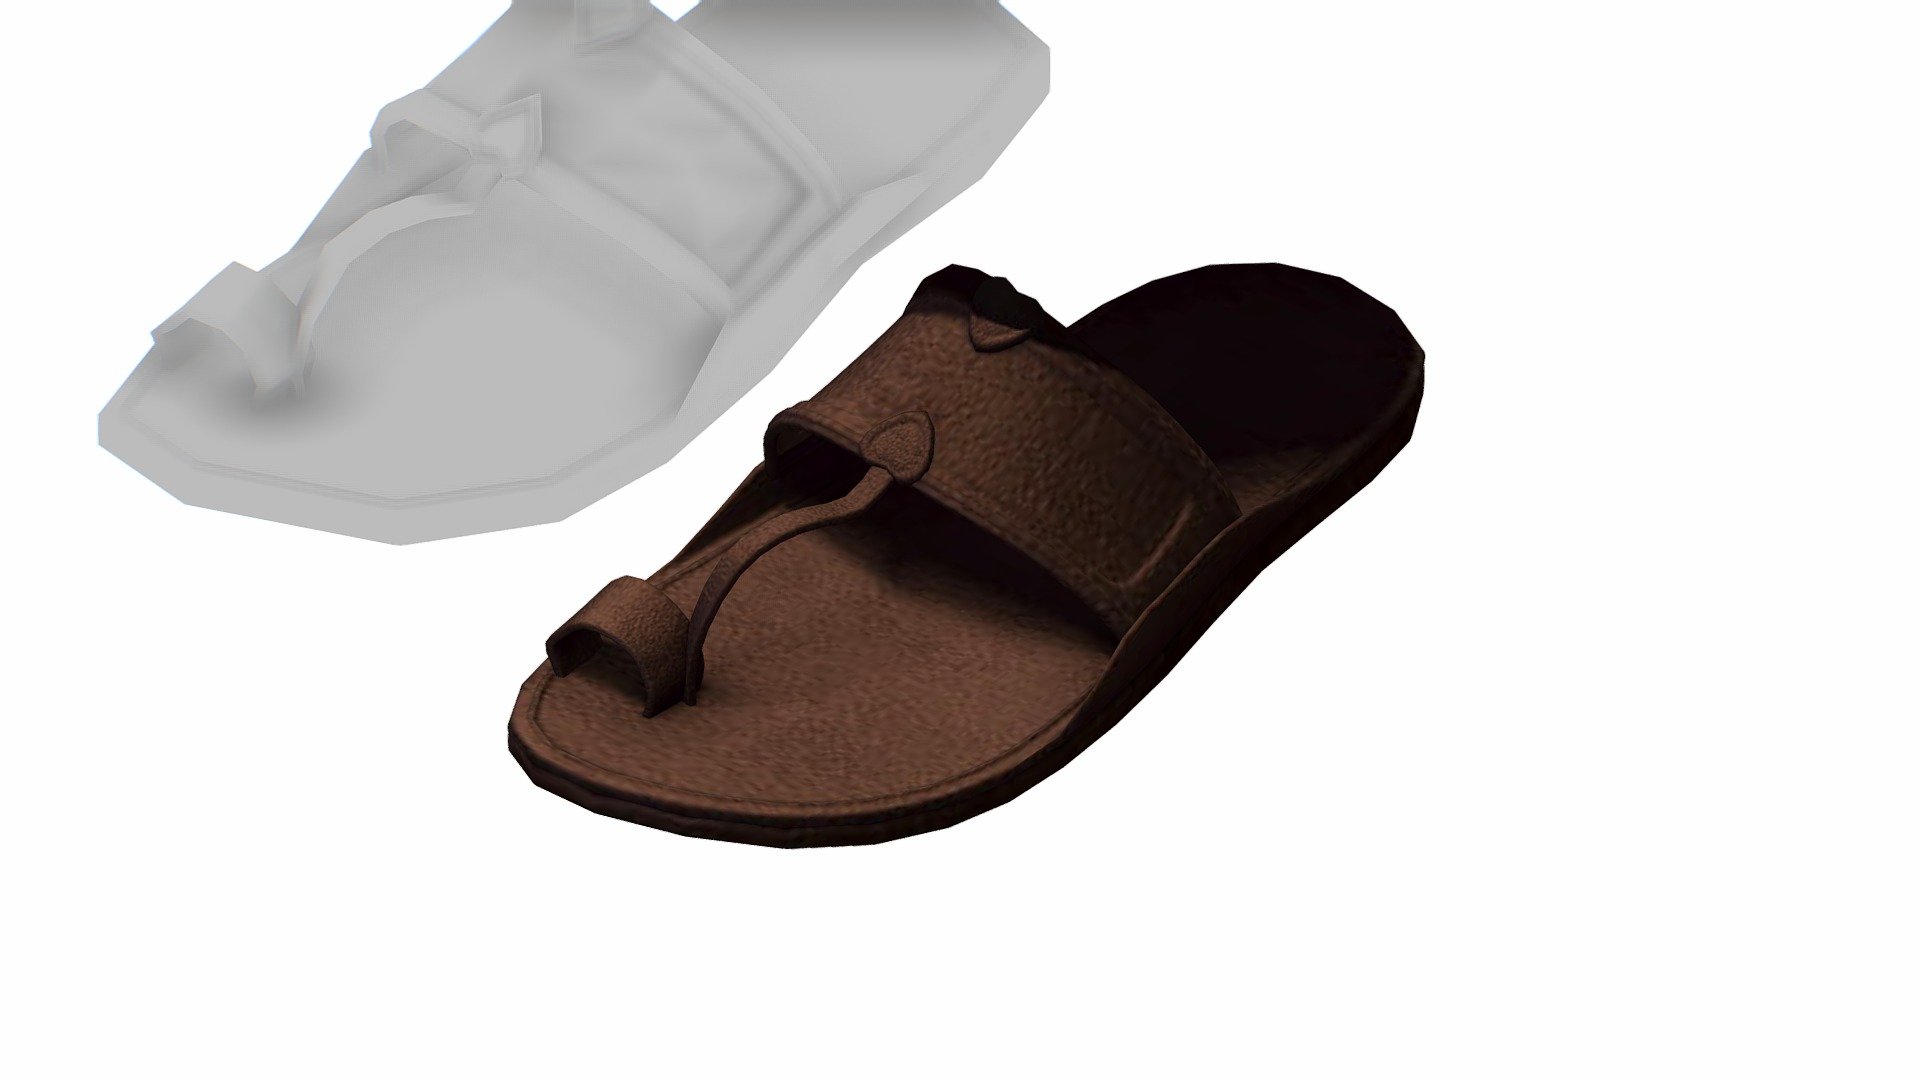 Cartoon High Poly Subdivision Brown Sandals

No HDRI map, No Light, No material settings - only Diffuse/Color Map Texture (4000x4000)

More information about the 3D model: please use the Sketchfab Model Inspector - Key (i) - Cartoon High Poly Subdivision Brown Sandals - Buy Royalty Free 3D model by Oleg Shuldiakov (@olegshuldiakov) 3d model